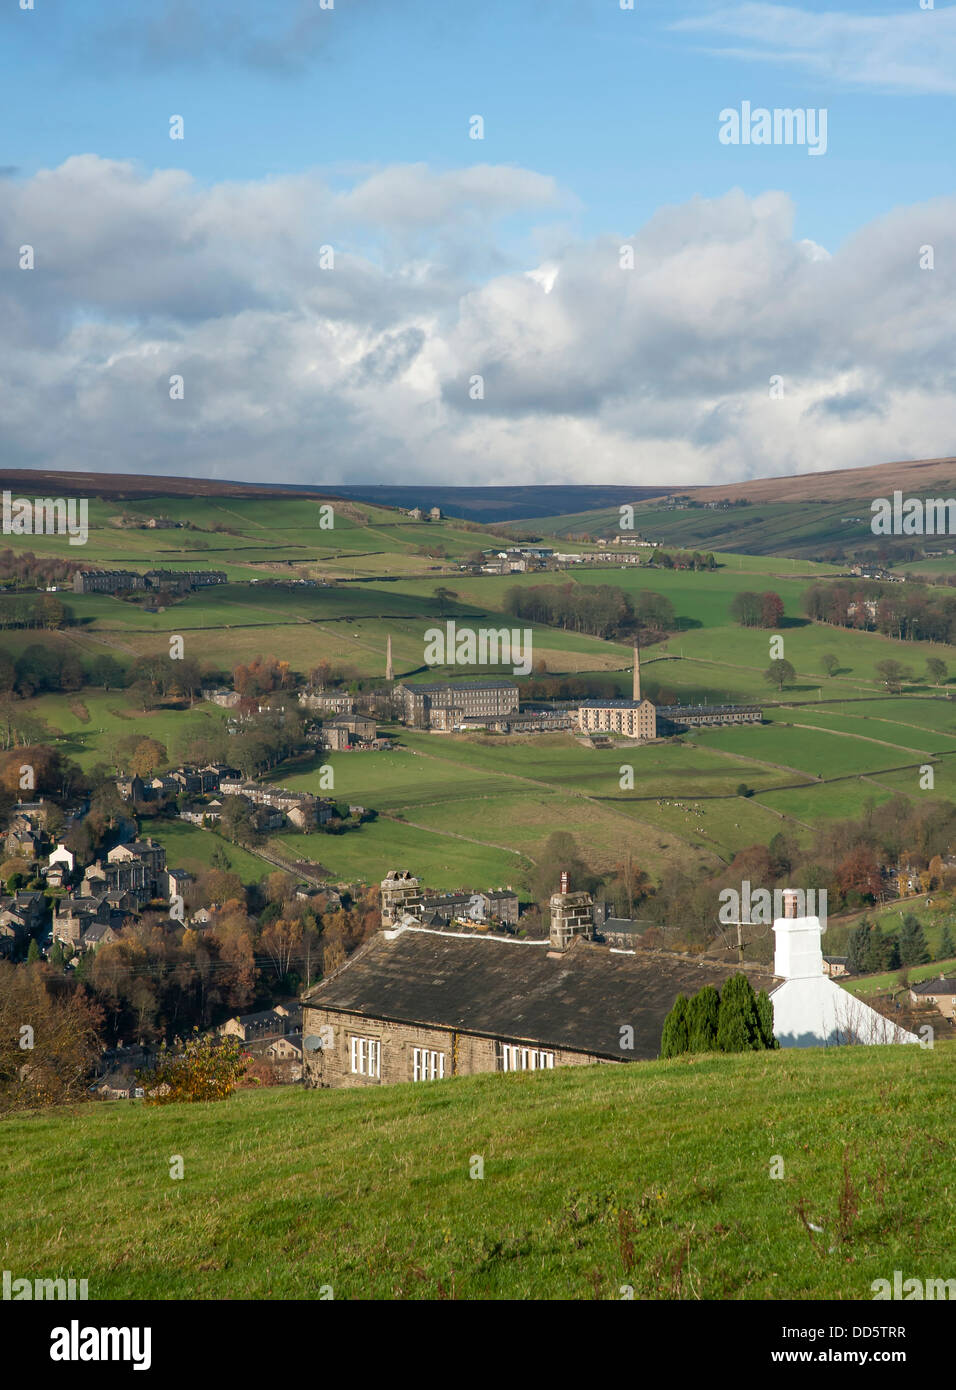 An Edwardian farmhouse overlooking a Yorkshire Dales valley Stock Photo